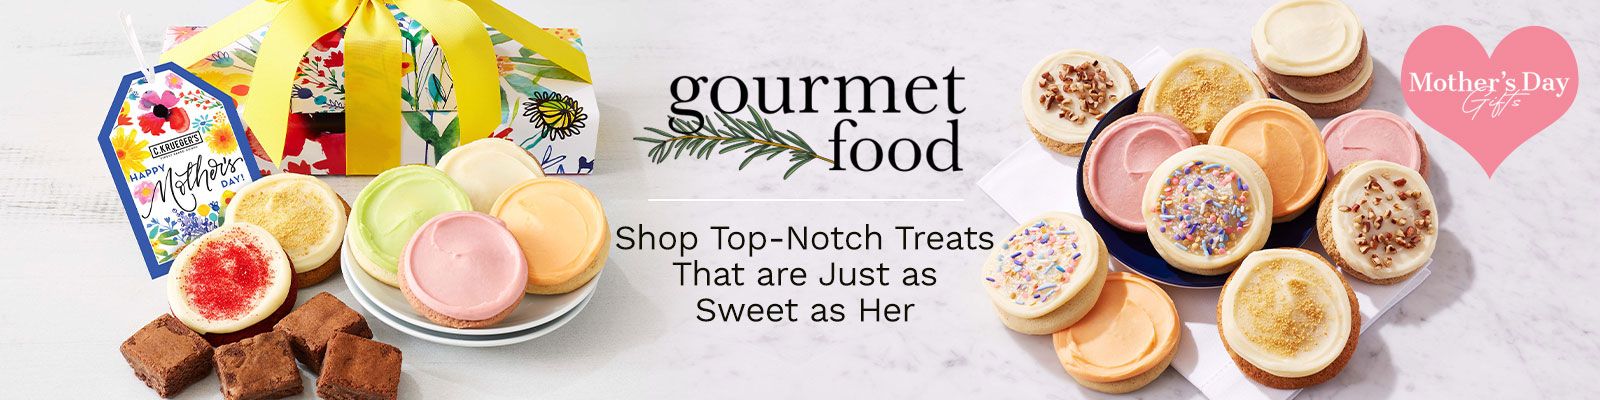 Gourmet Food - Top-Notch Treats That are Just as Sweet as Her ft. 523-225, 523-224 & 523-226